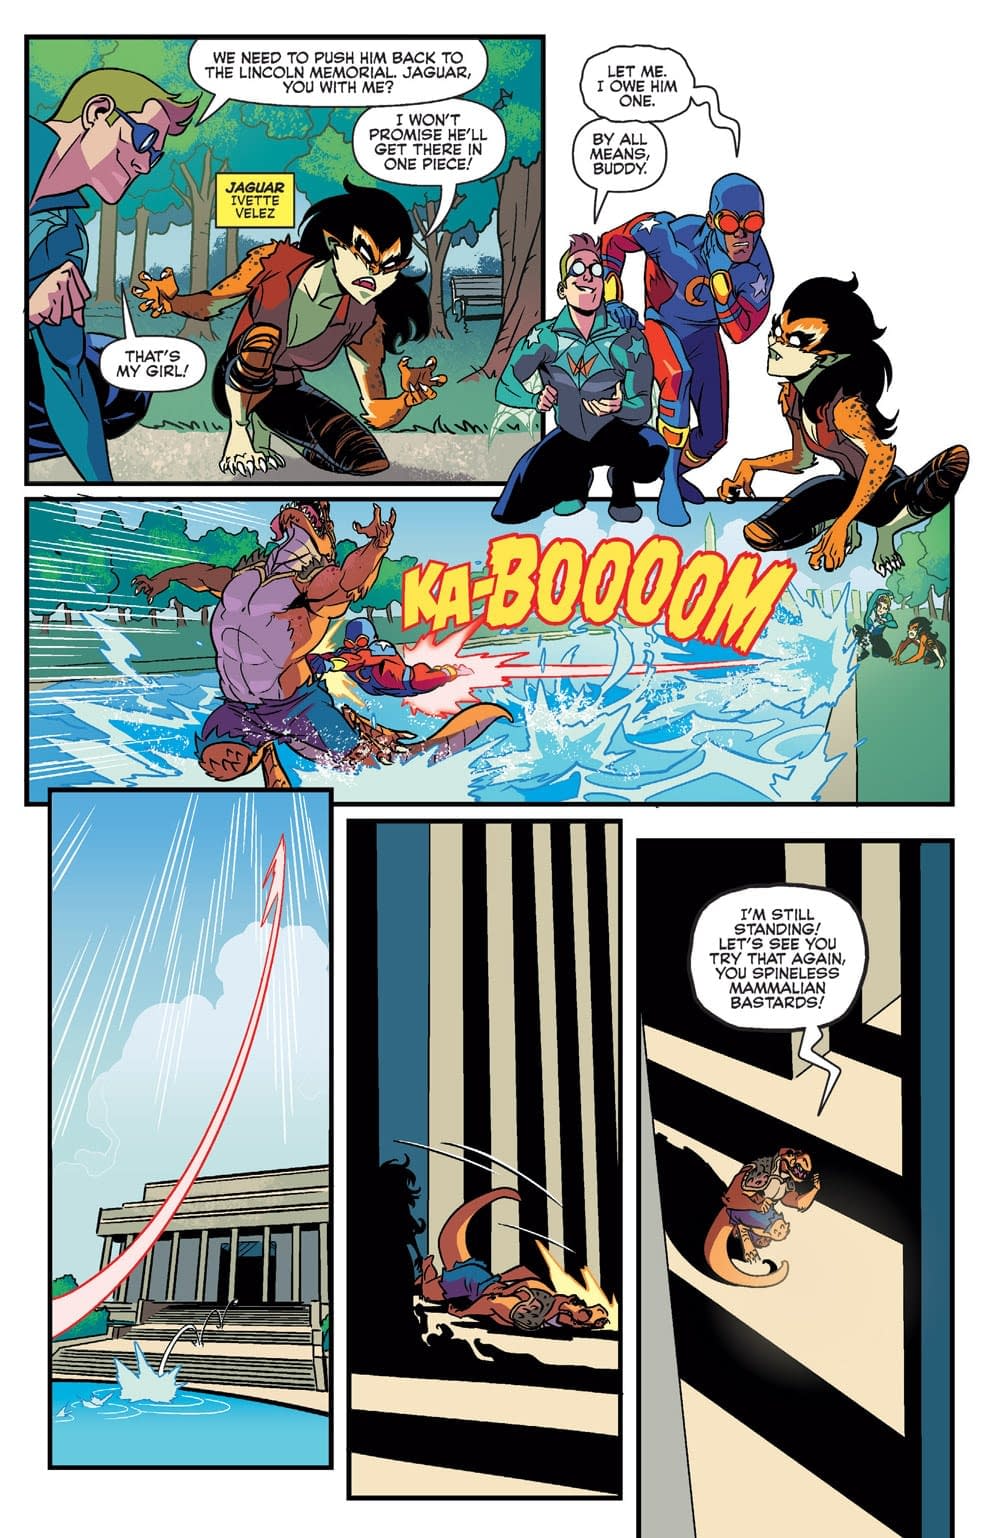 Secret Affairs, Corpse Reanimation, and Beach Invasions in Tomorrow's Archie Comics